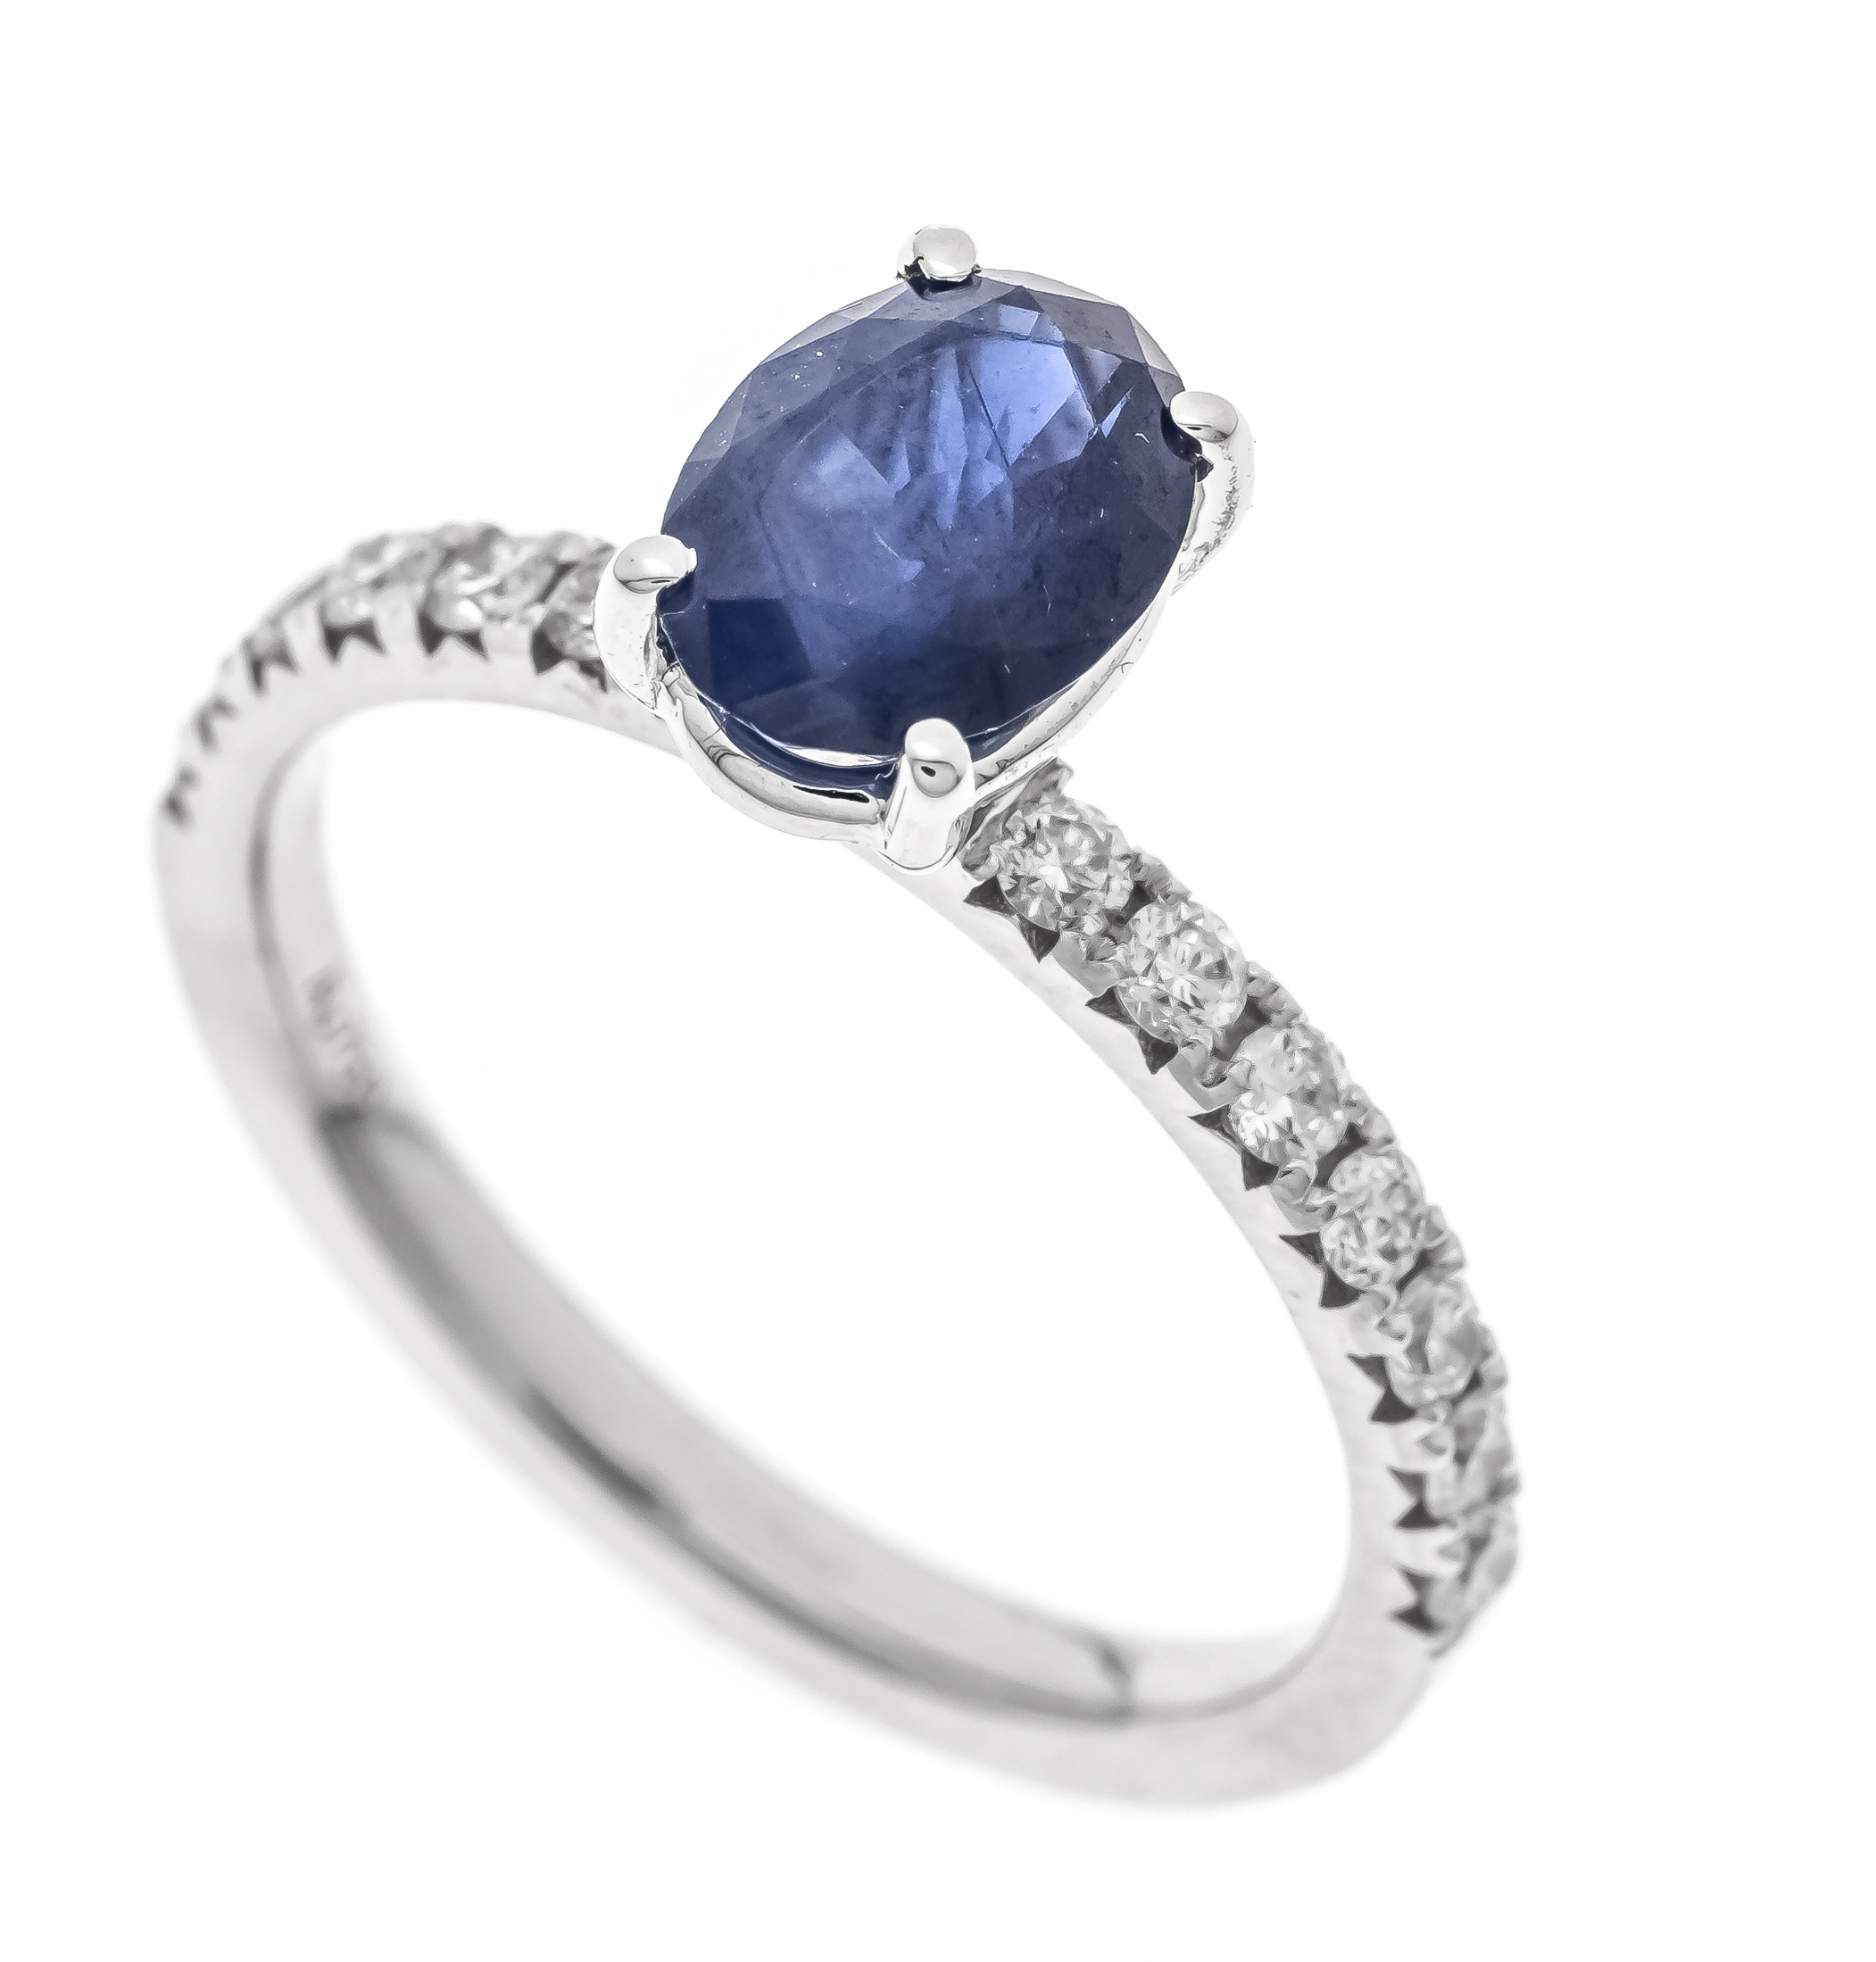 Sapphire-brilliant ring WG 750/000 with an oval faceted sapphire 1.57 ct in a luminous blue,